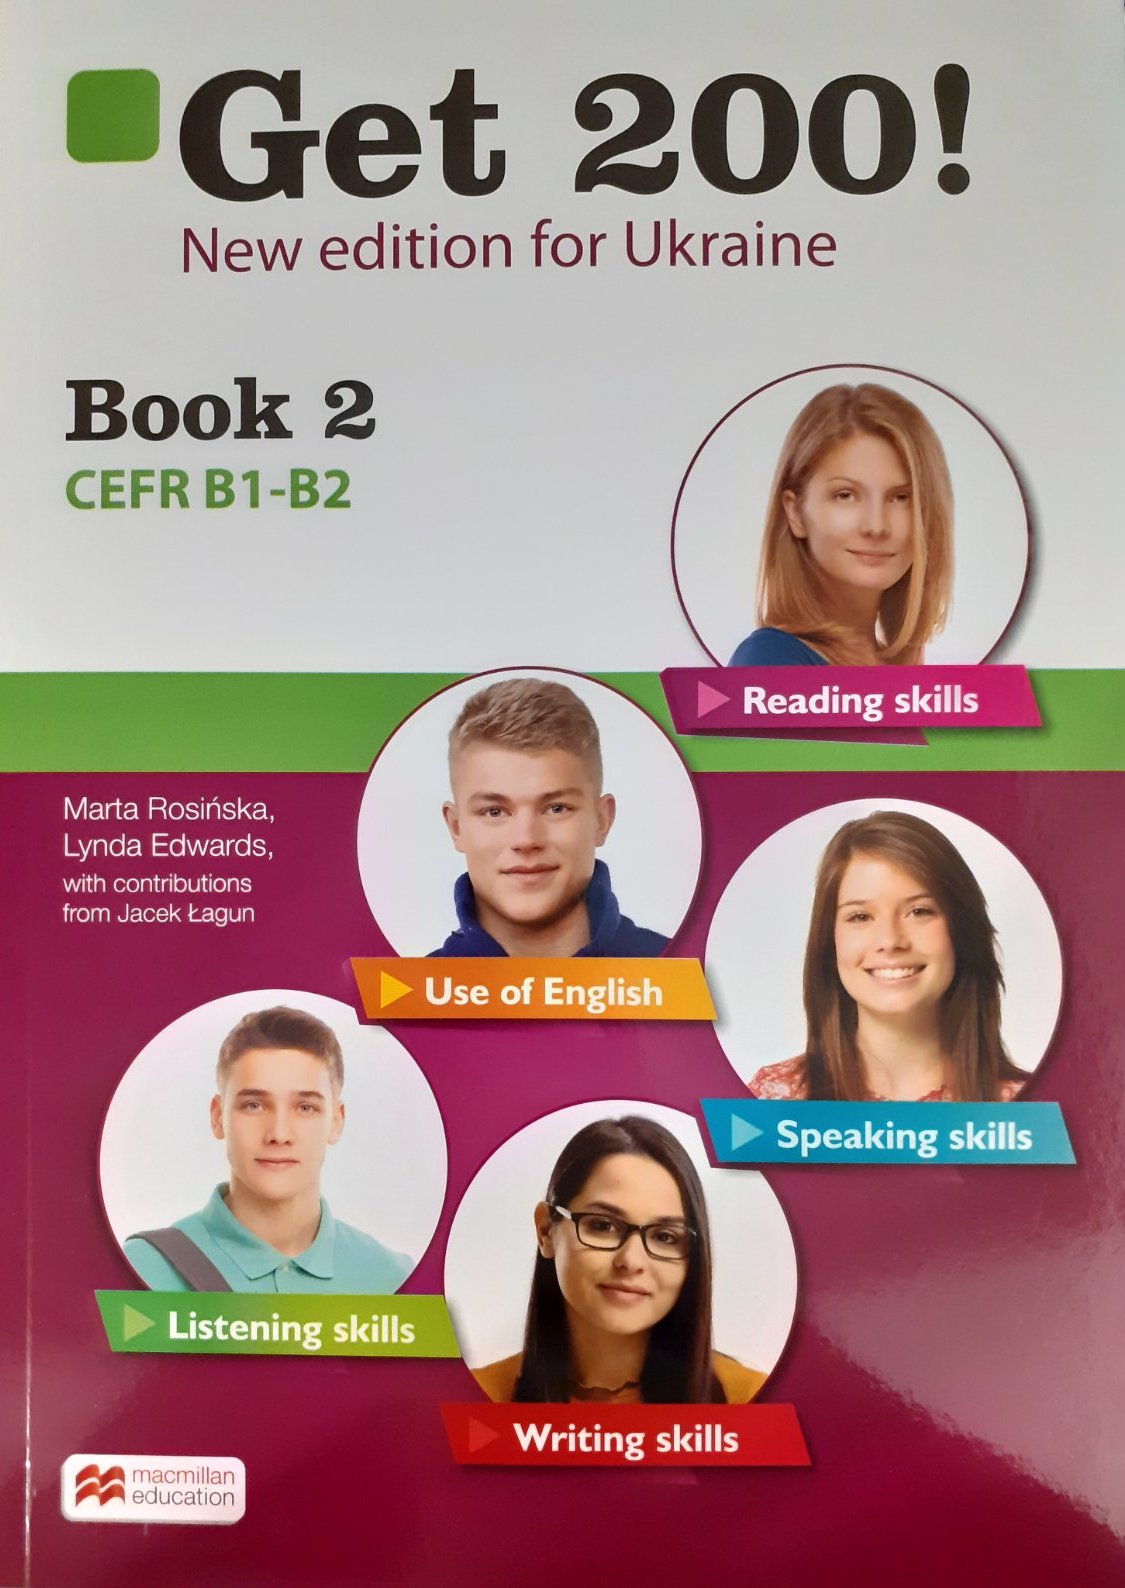 GET 200! Book 1 New Edition for Ukraine